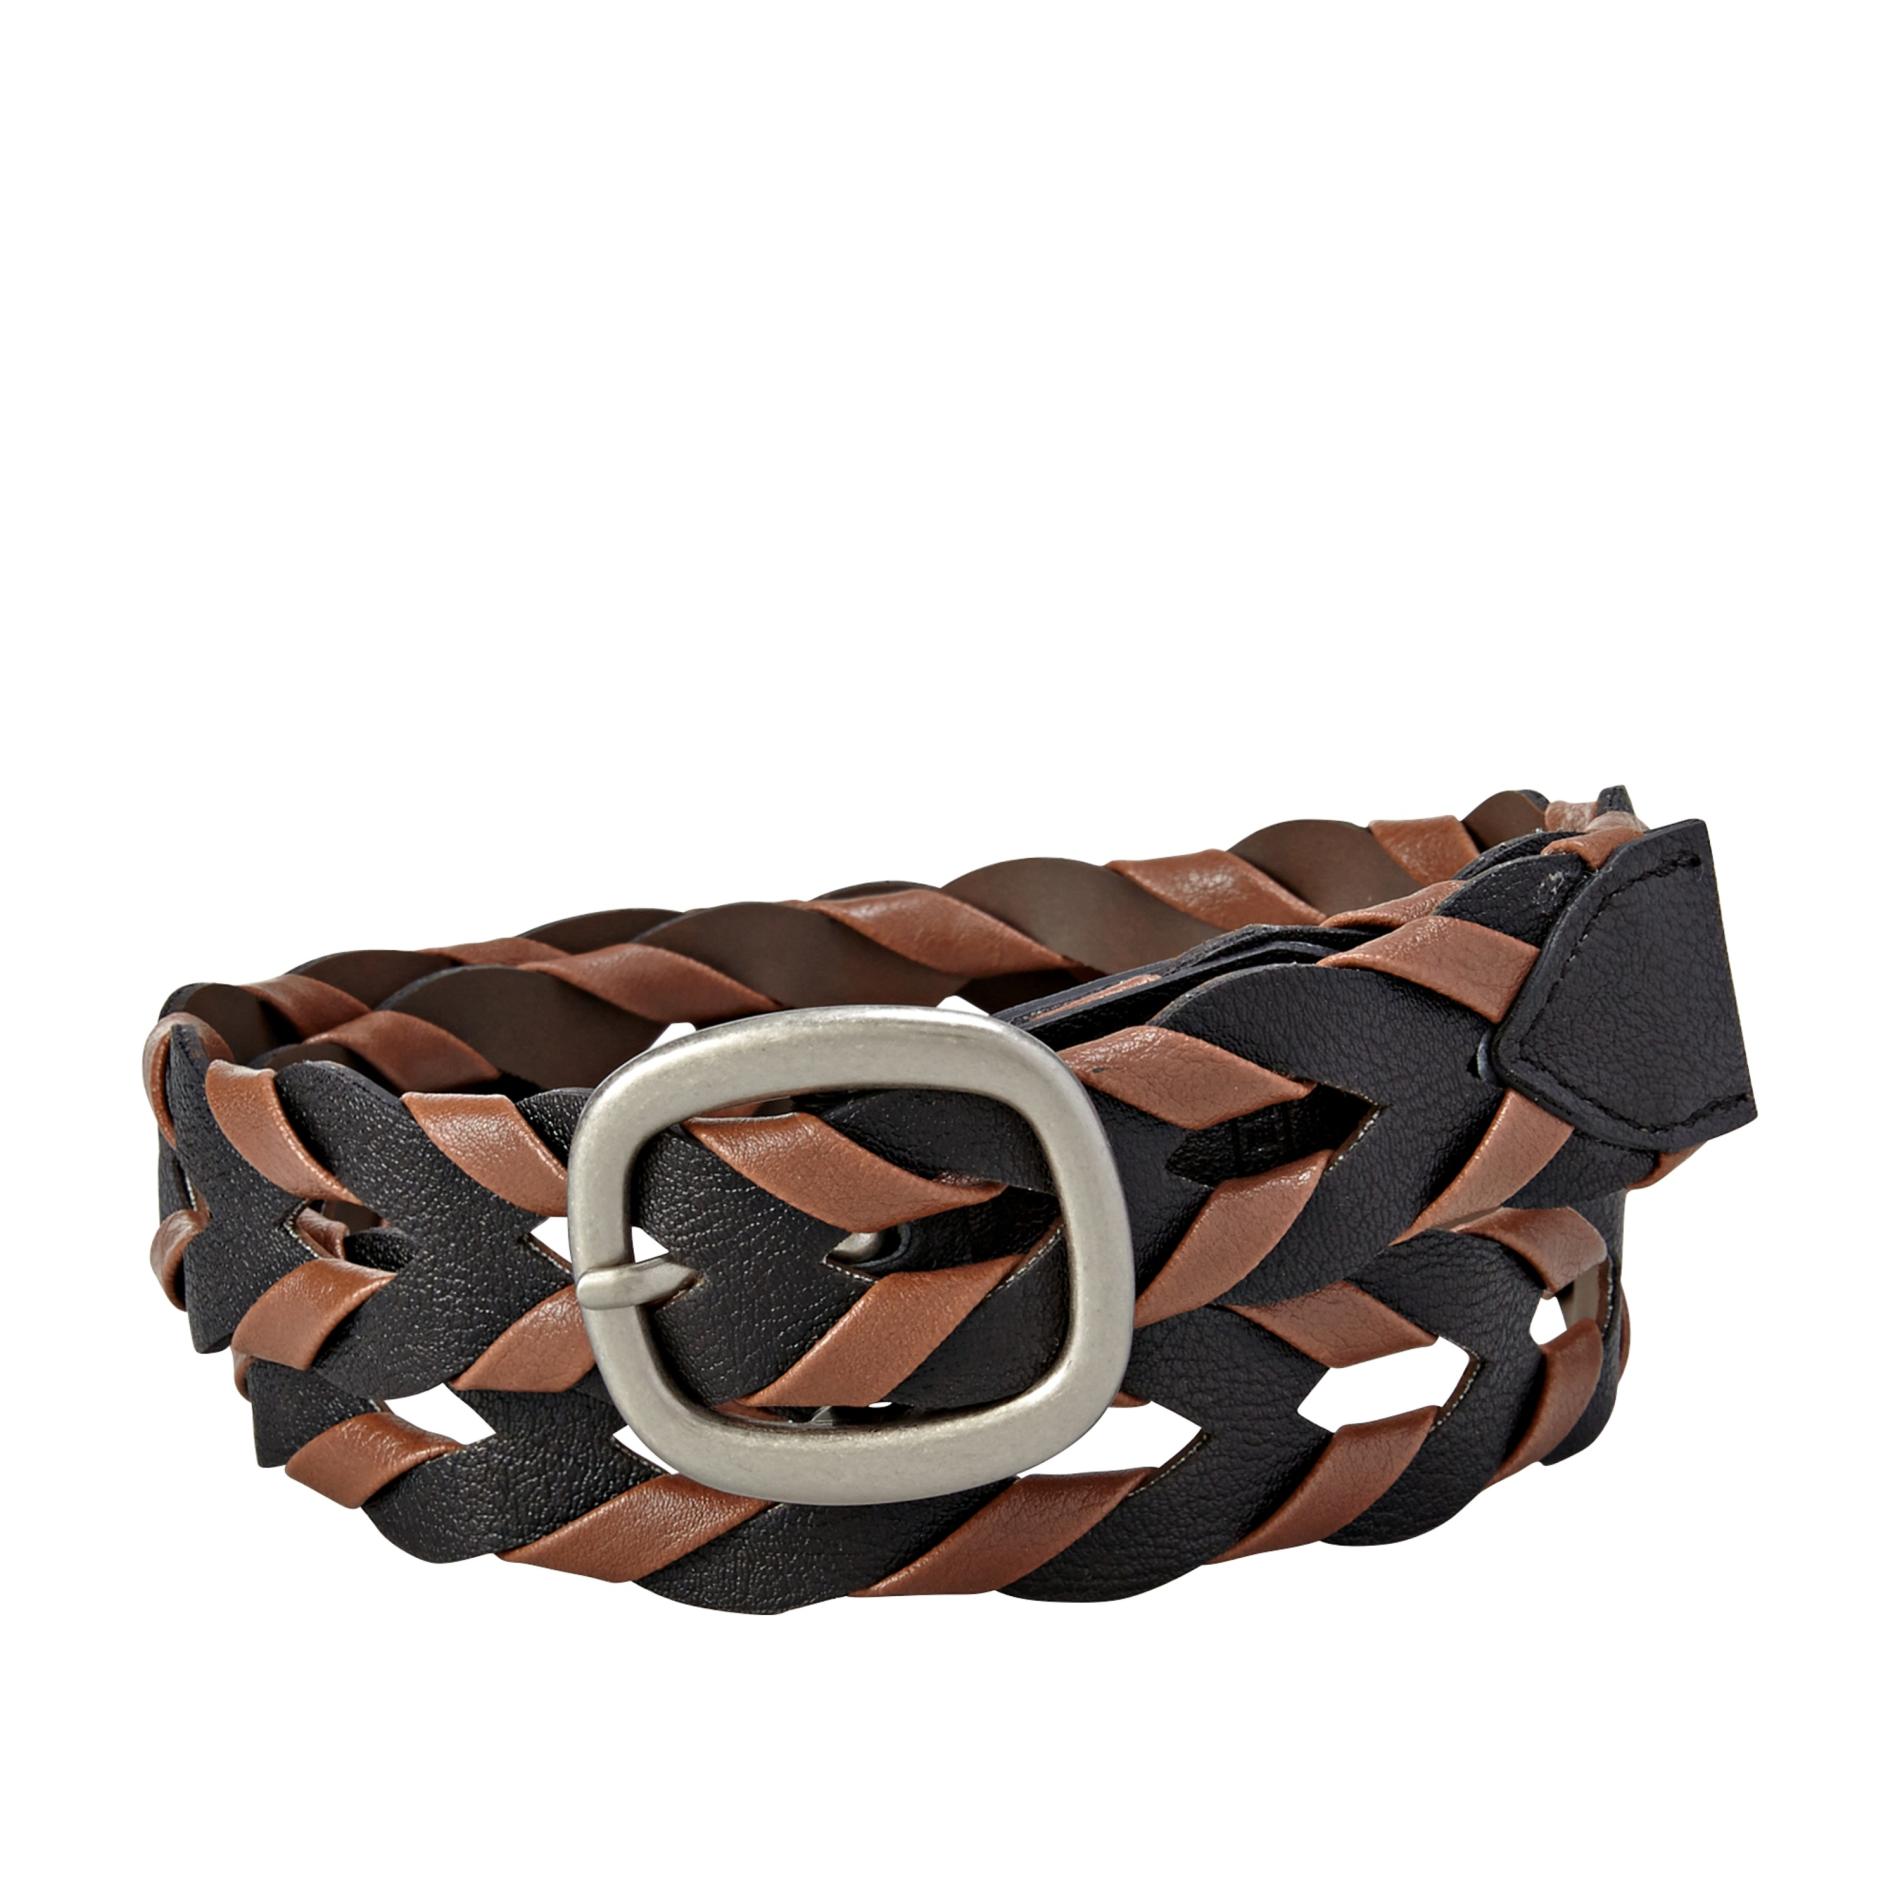 Relic Women's Woven Two-Tone Leather Belt